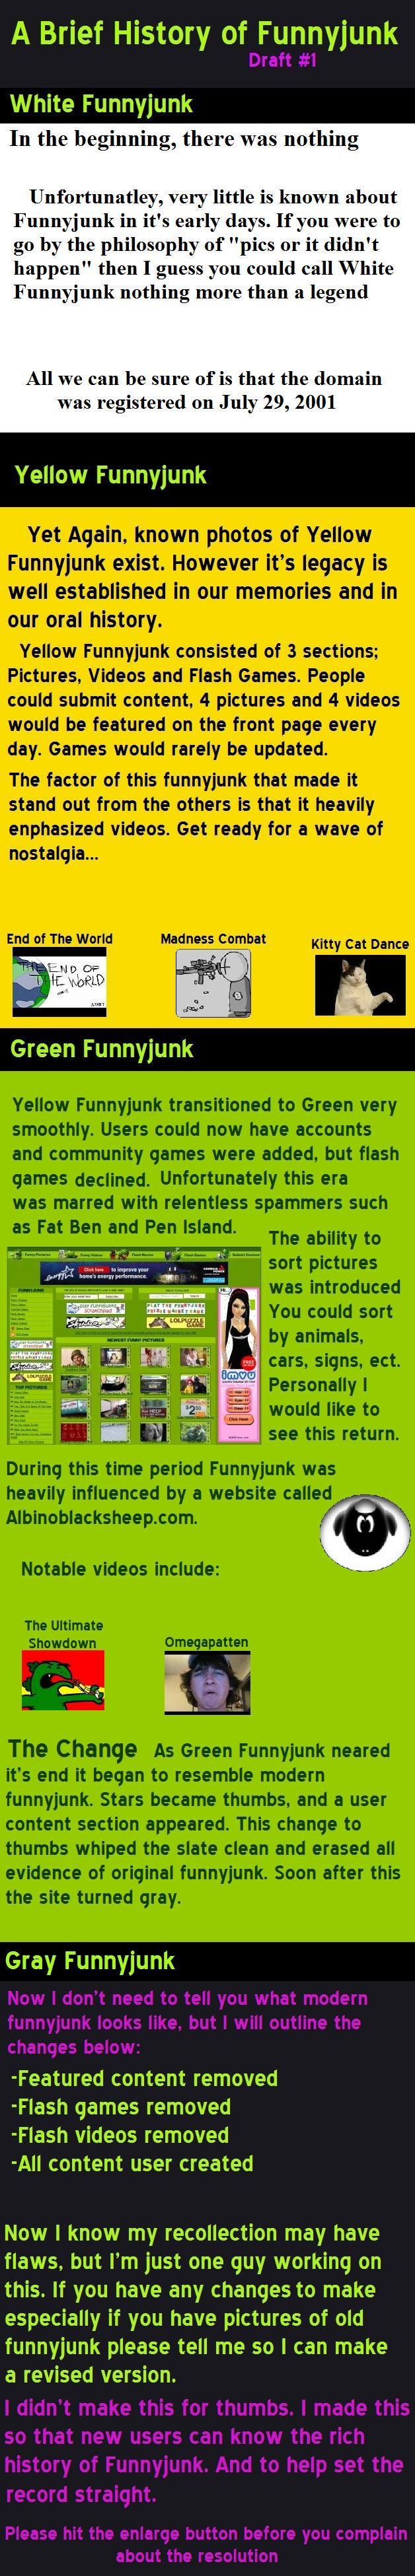 History of FJ. Admin asked.. A Brief History of Funnyjunk White Funnyjunk In the beginning, there was nothing Unfortunatley, very little is known about Funnyjun